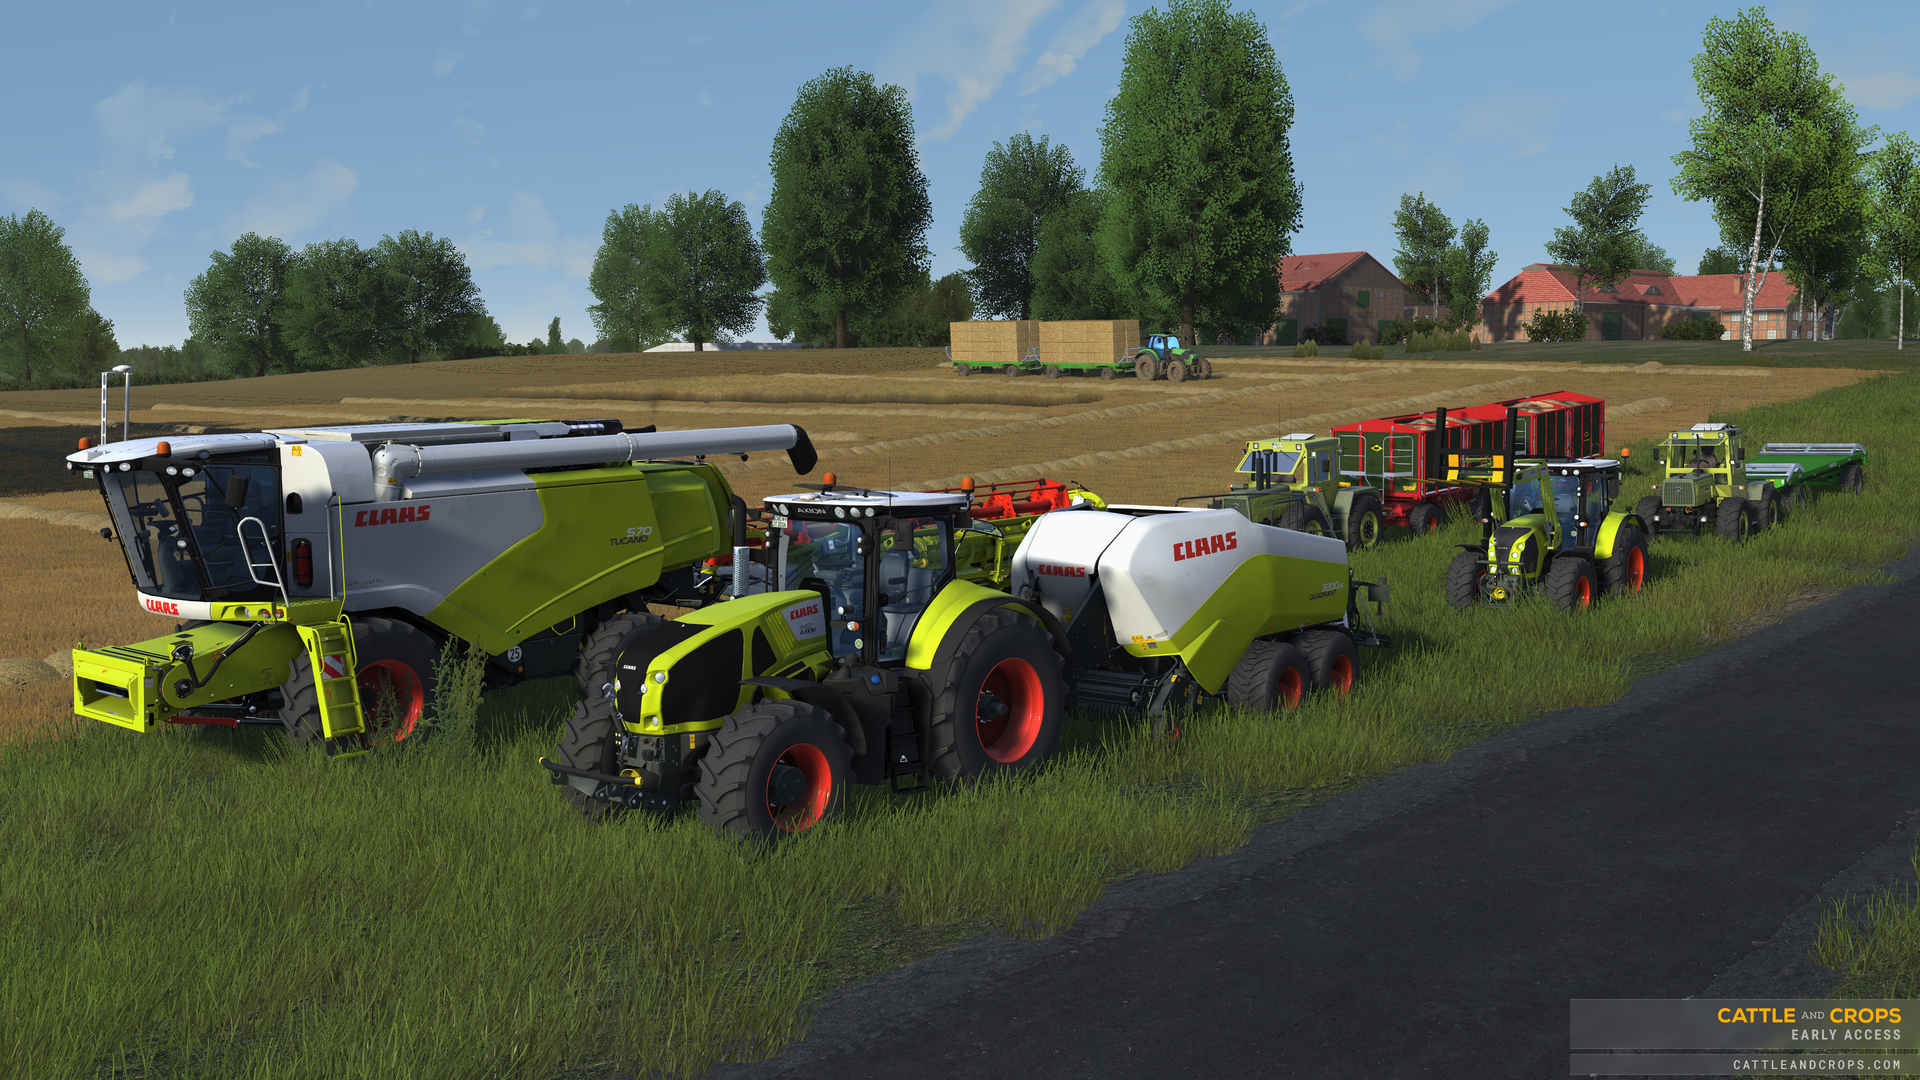 Professional Farmer: Cattle and Crops - Early Access Update Release v0.2.5....